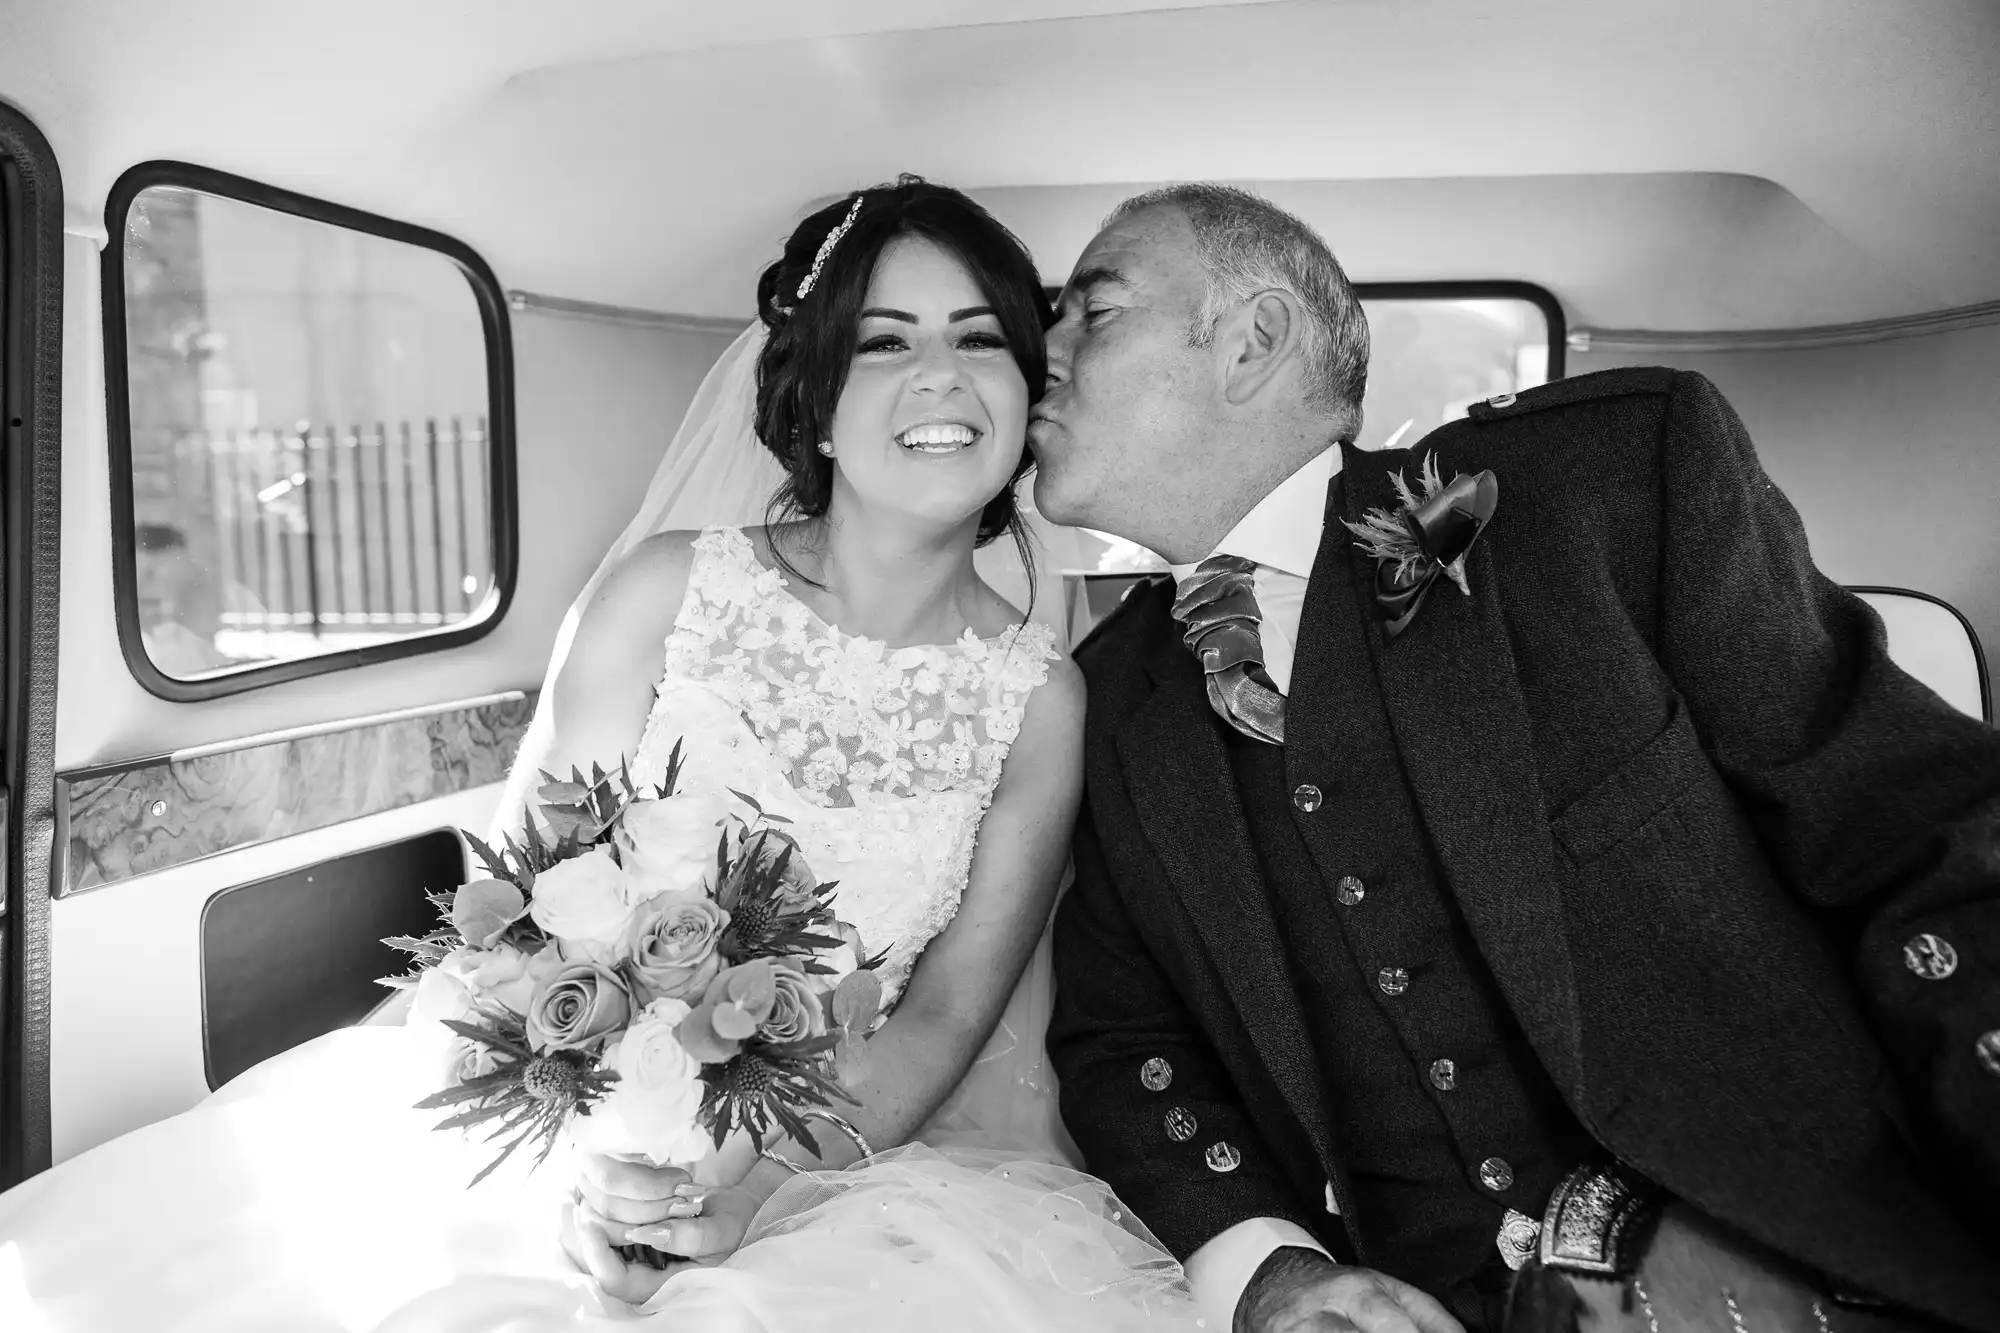 A bride in a white lace dress smiles joyfully as an older man in a traditional suit kisses her cheek inside a vintage car.